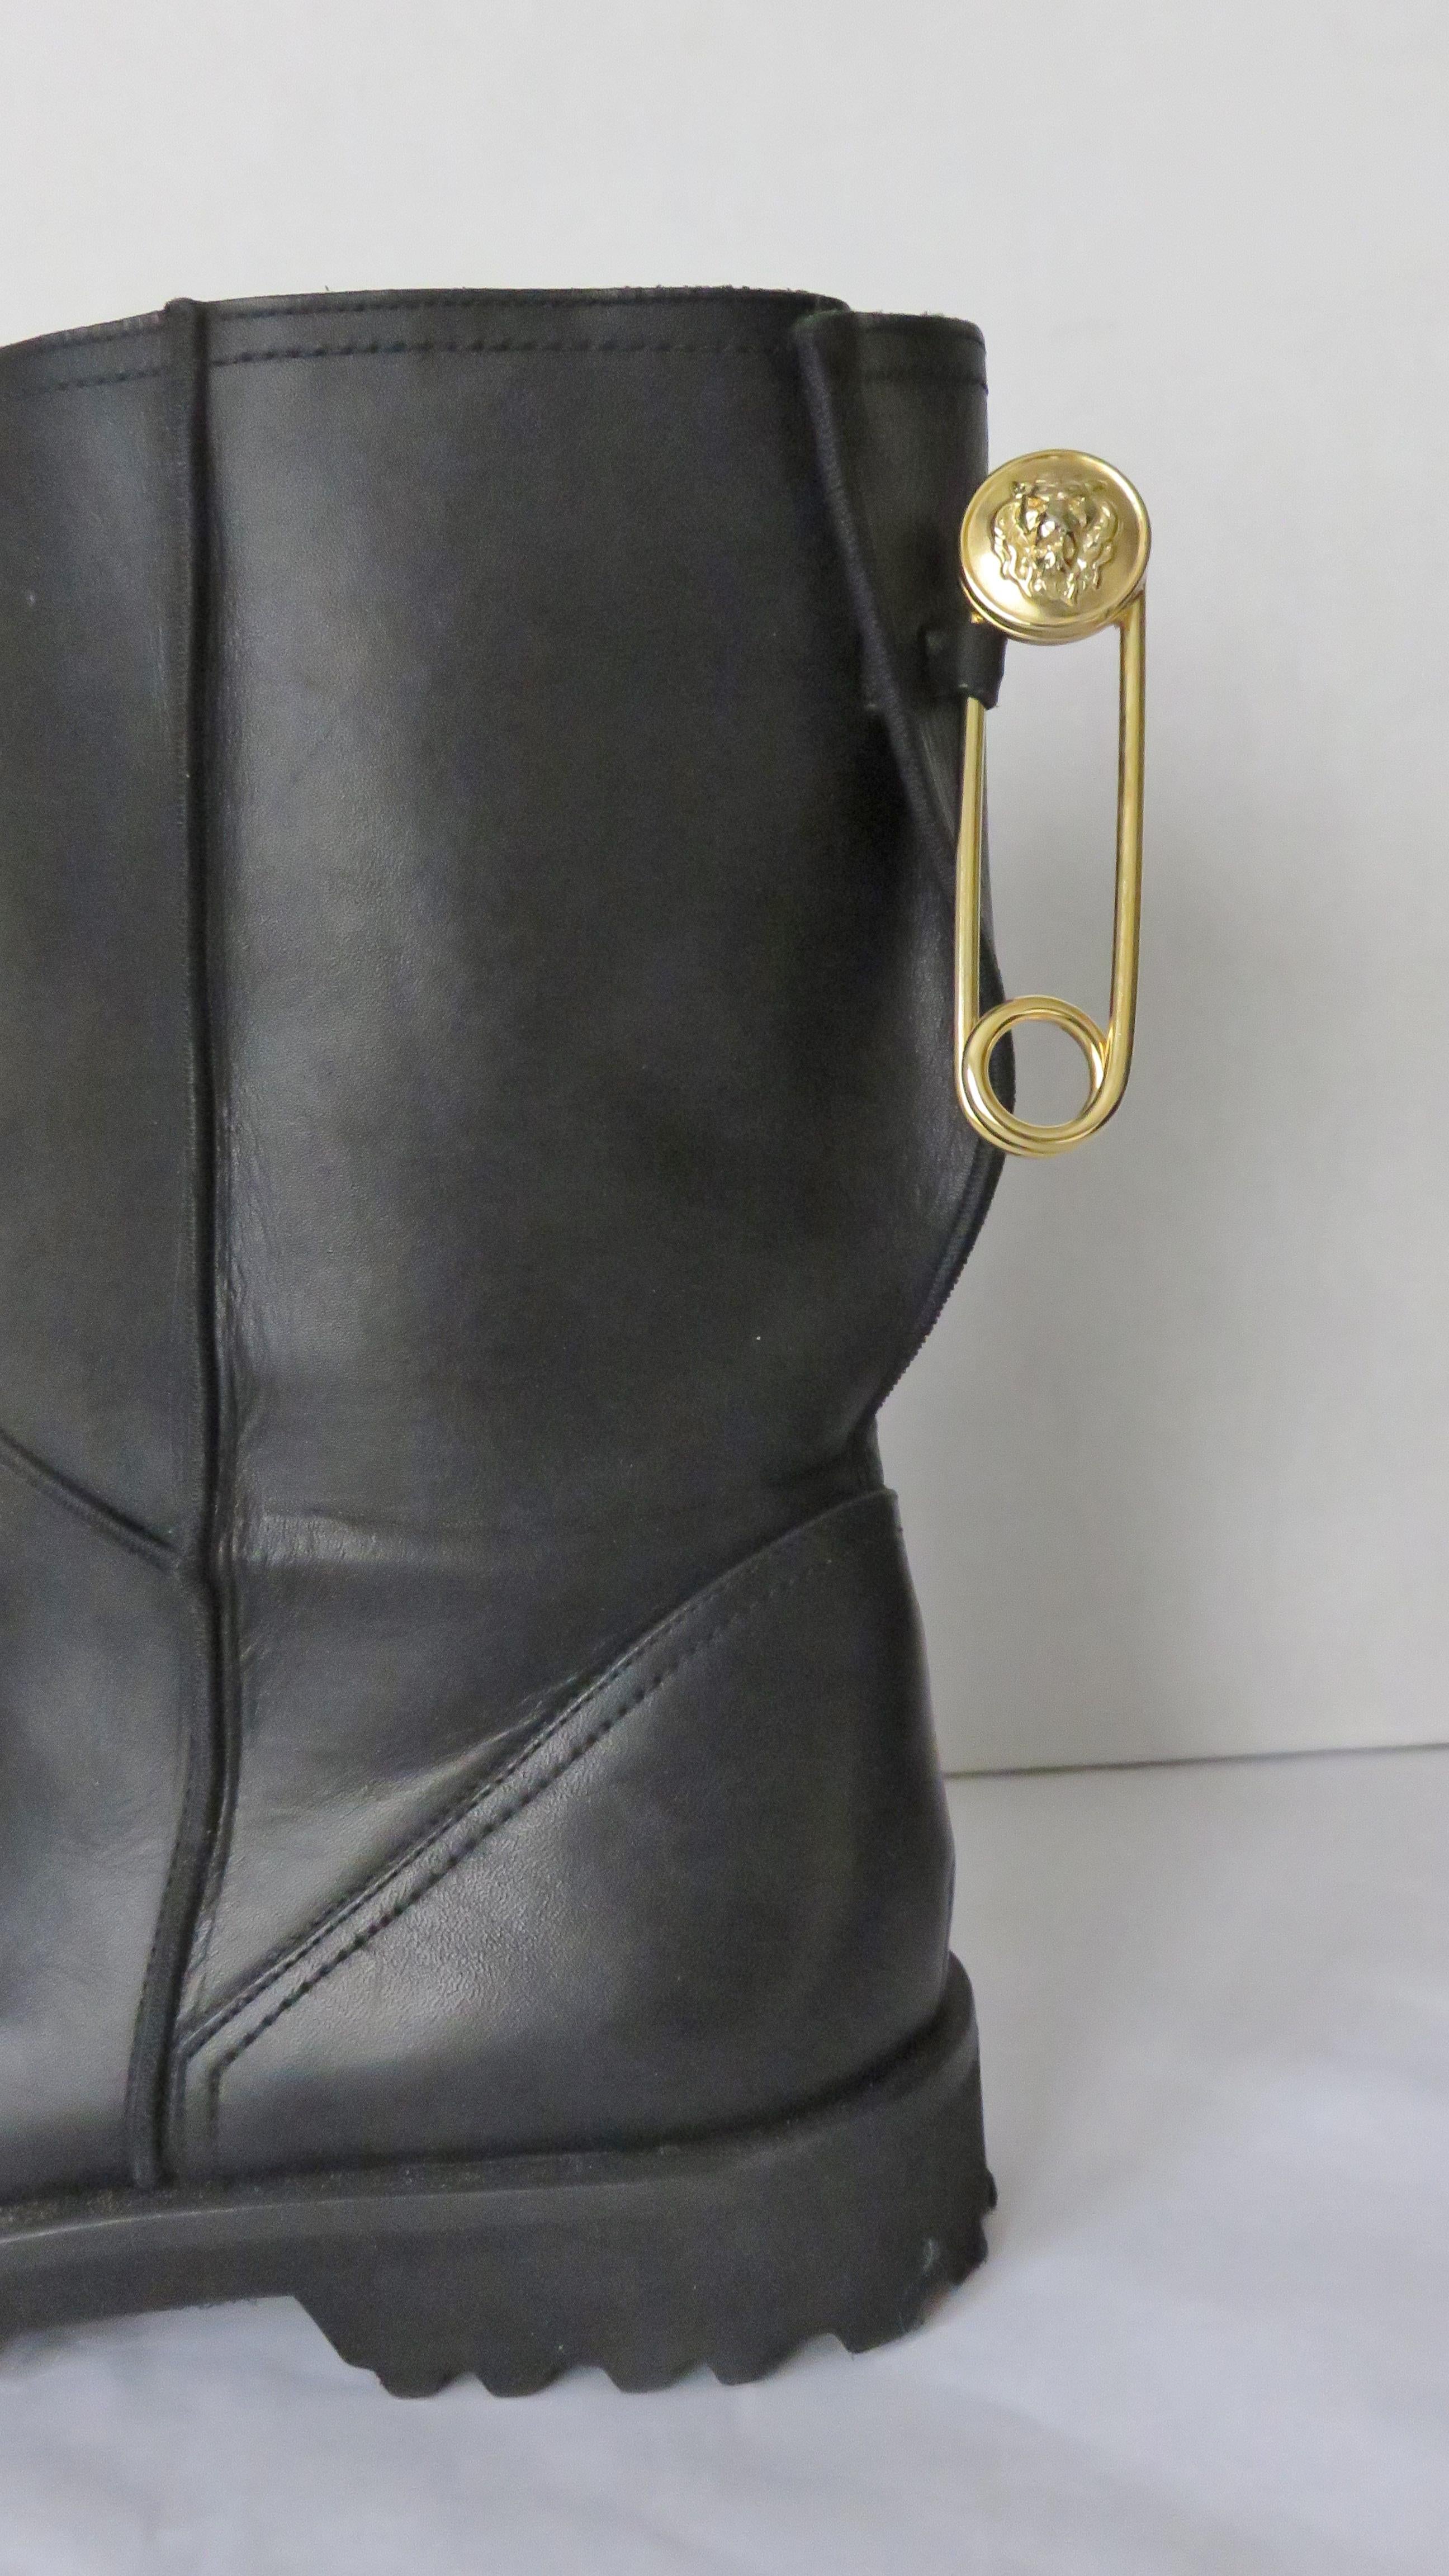 Gianni Versace New Size 37.5 Safety Pin Boots 1990s 4